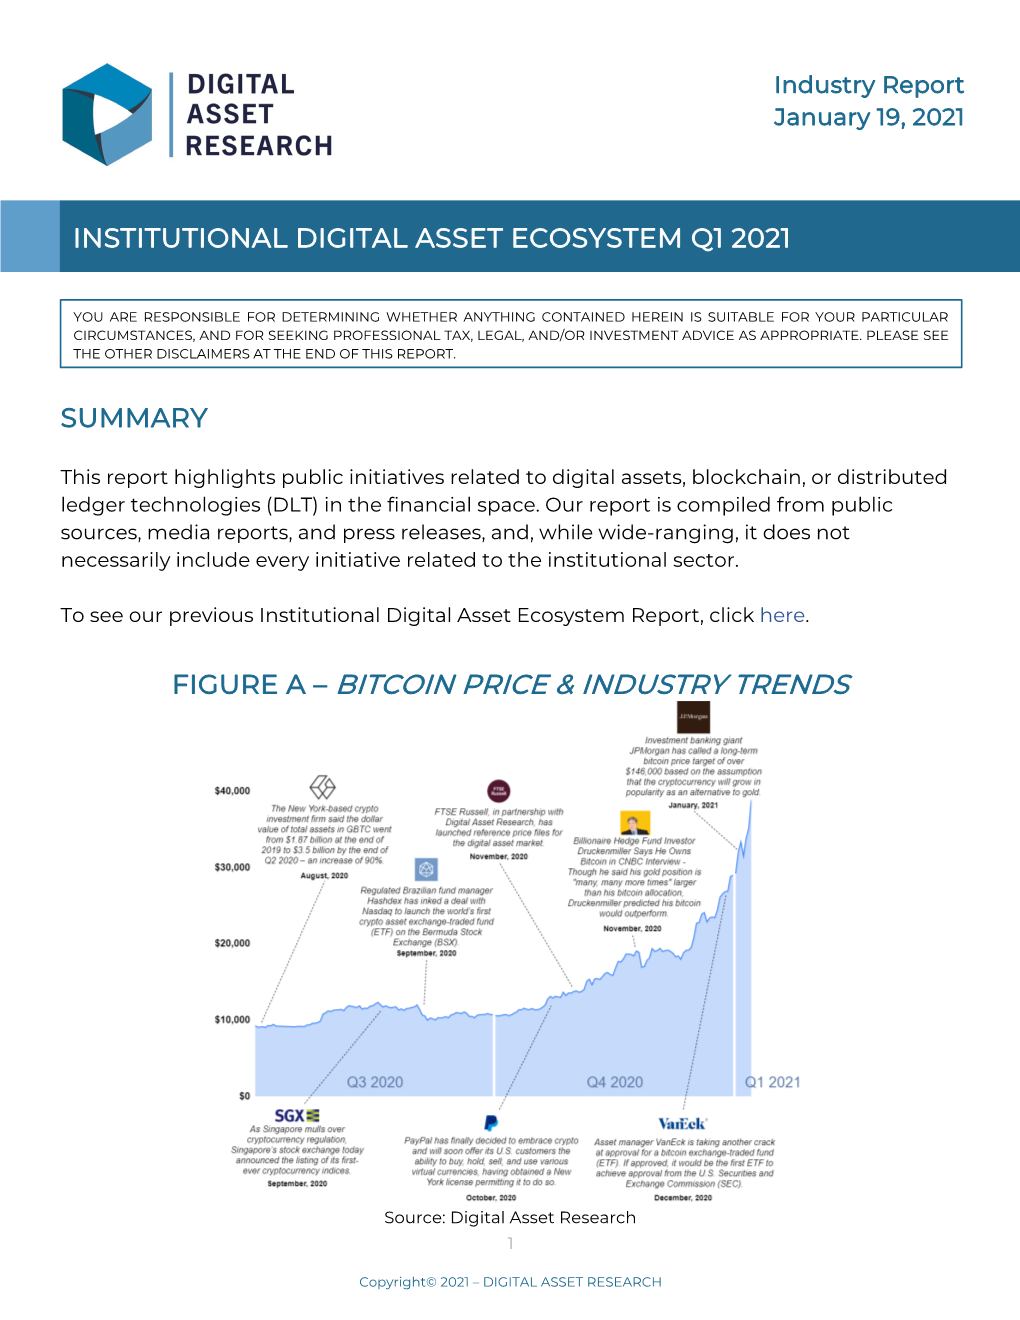 Bitcoin Price & Industry Trends